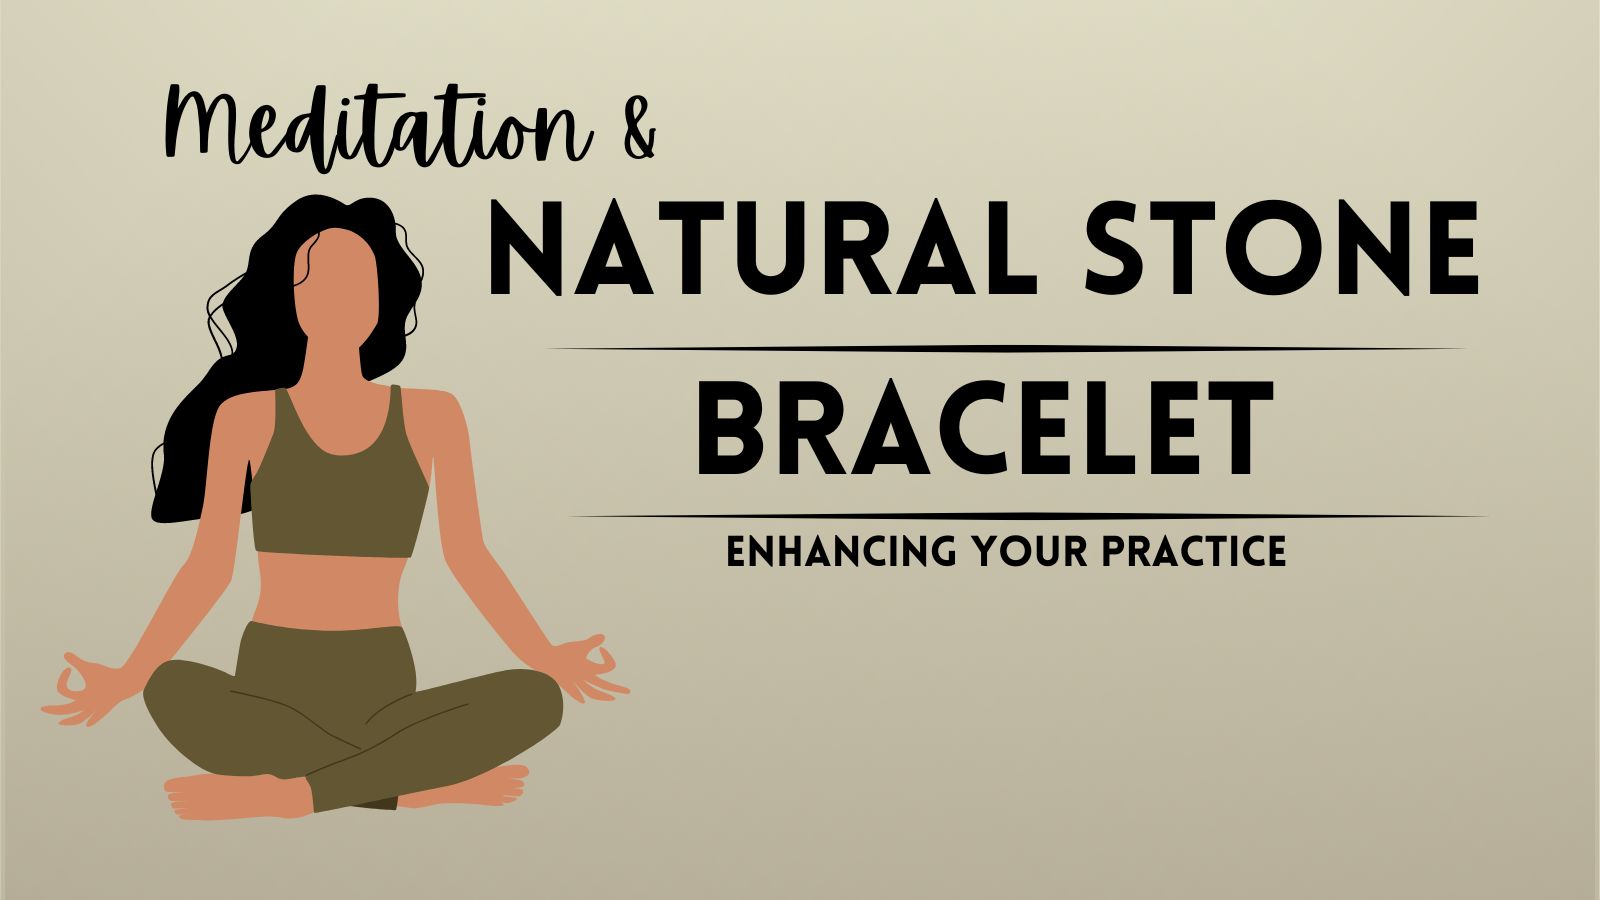 Meditation and Natural Stone Bracelets: Enhancing Your Practice